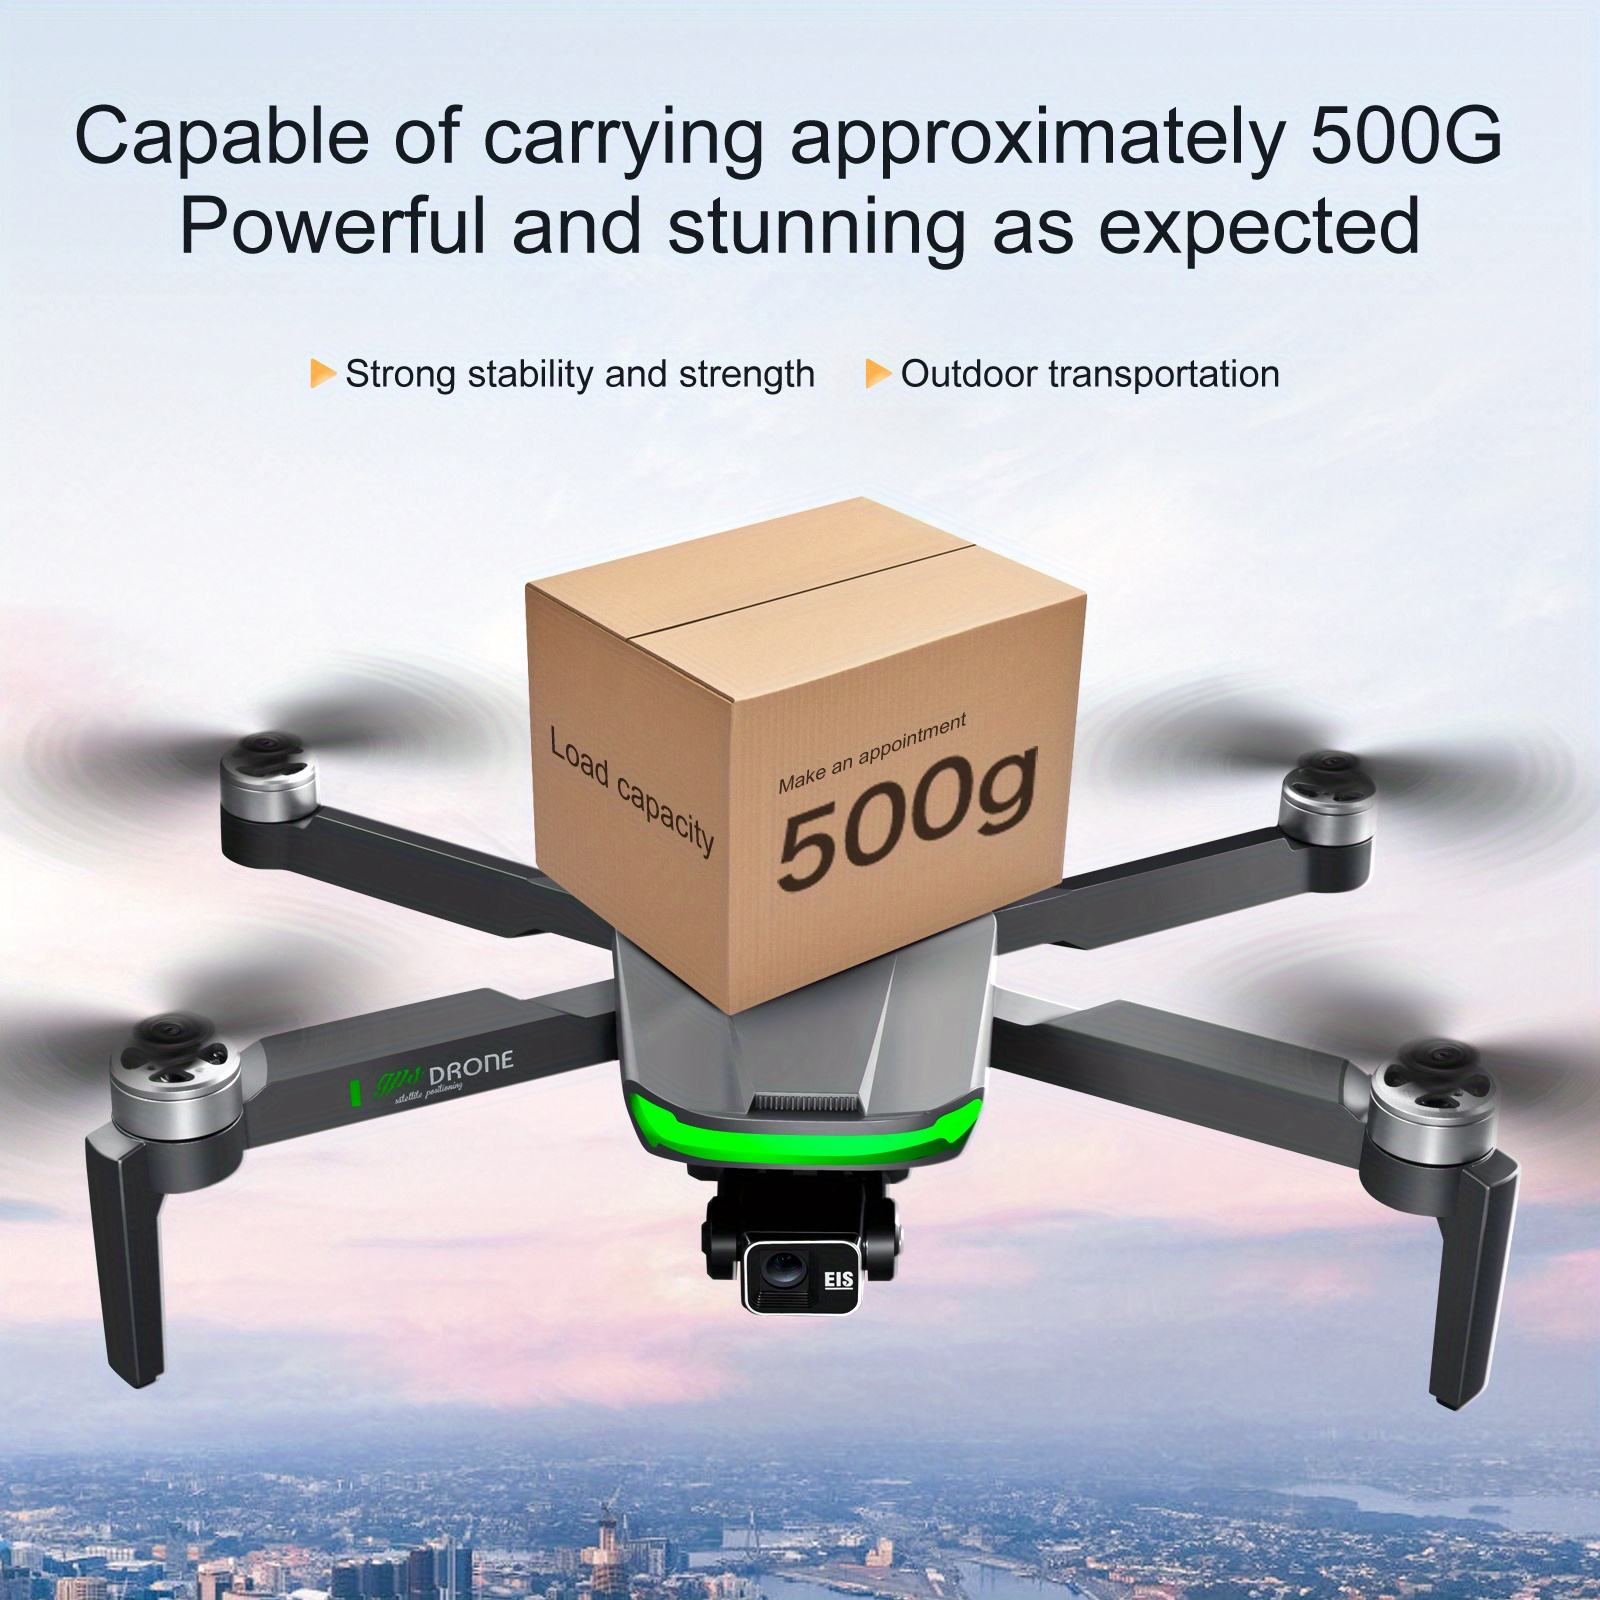 s155 professional drone uav quadcopter get the most out of your flight with gps relay brushless motor 500g payload 3 axis gimbal stabilizer christmas halloween thanksgiving gift details 3